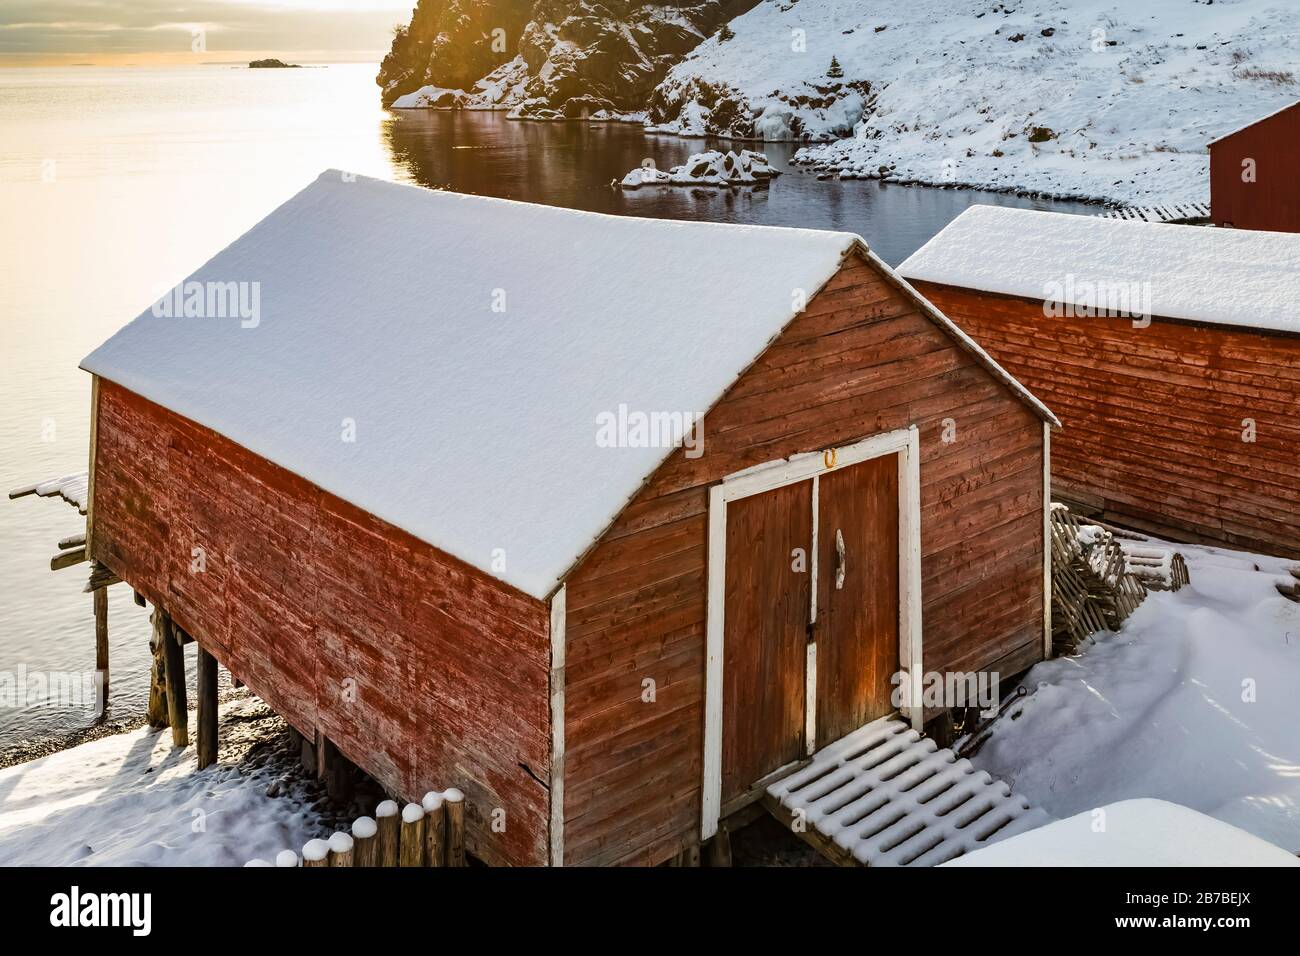 https://c8.alamy.com/comp/2B7BEJX/stages-used-for-fishing-equipment-storage-and-fishing-work-at-spurrells-heritage-house-a-quaint-airbnb-in-dunfield-newfoundland-canada-no-proper-2B7BEJX.jpg